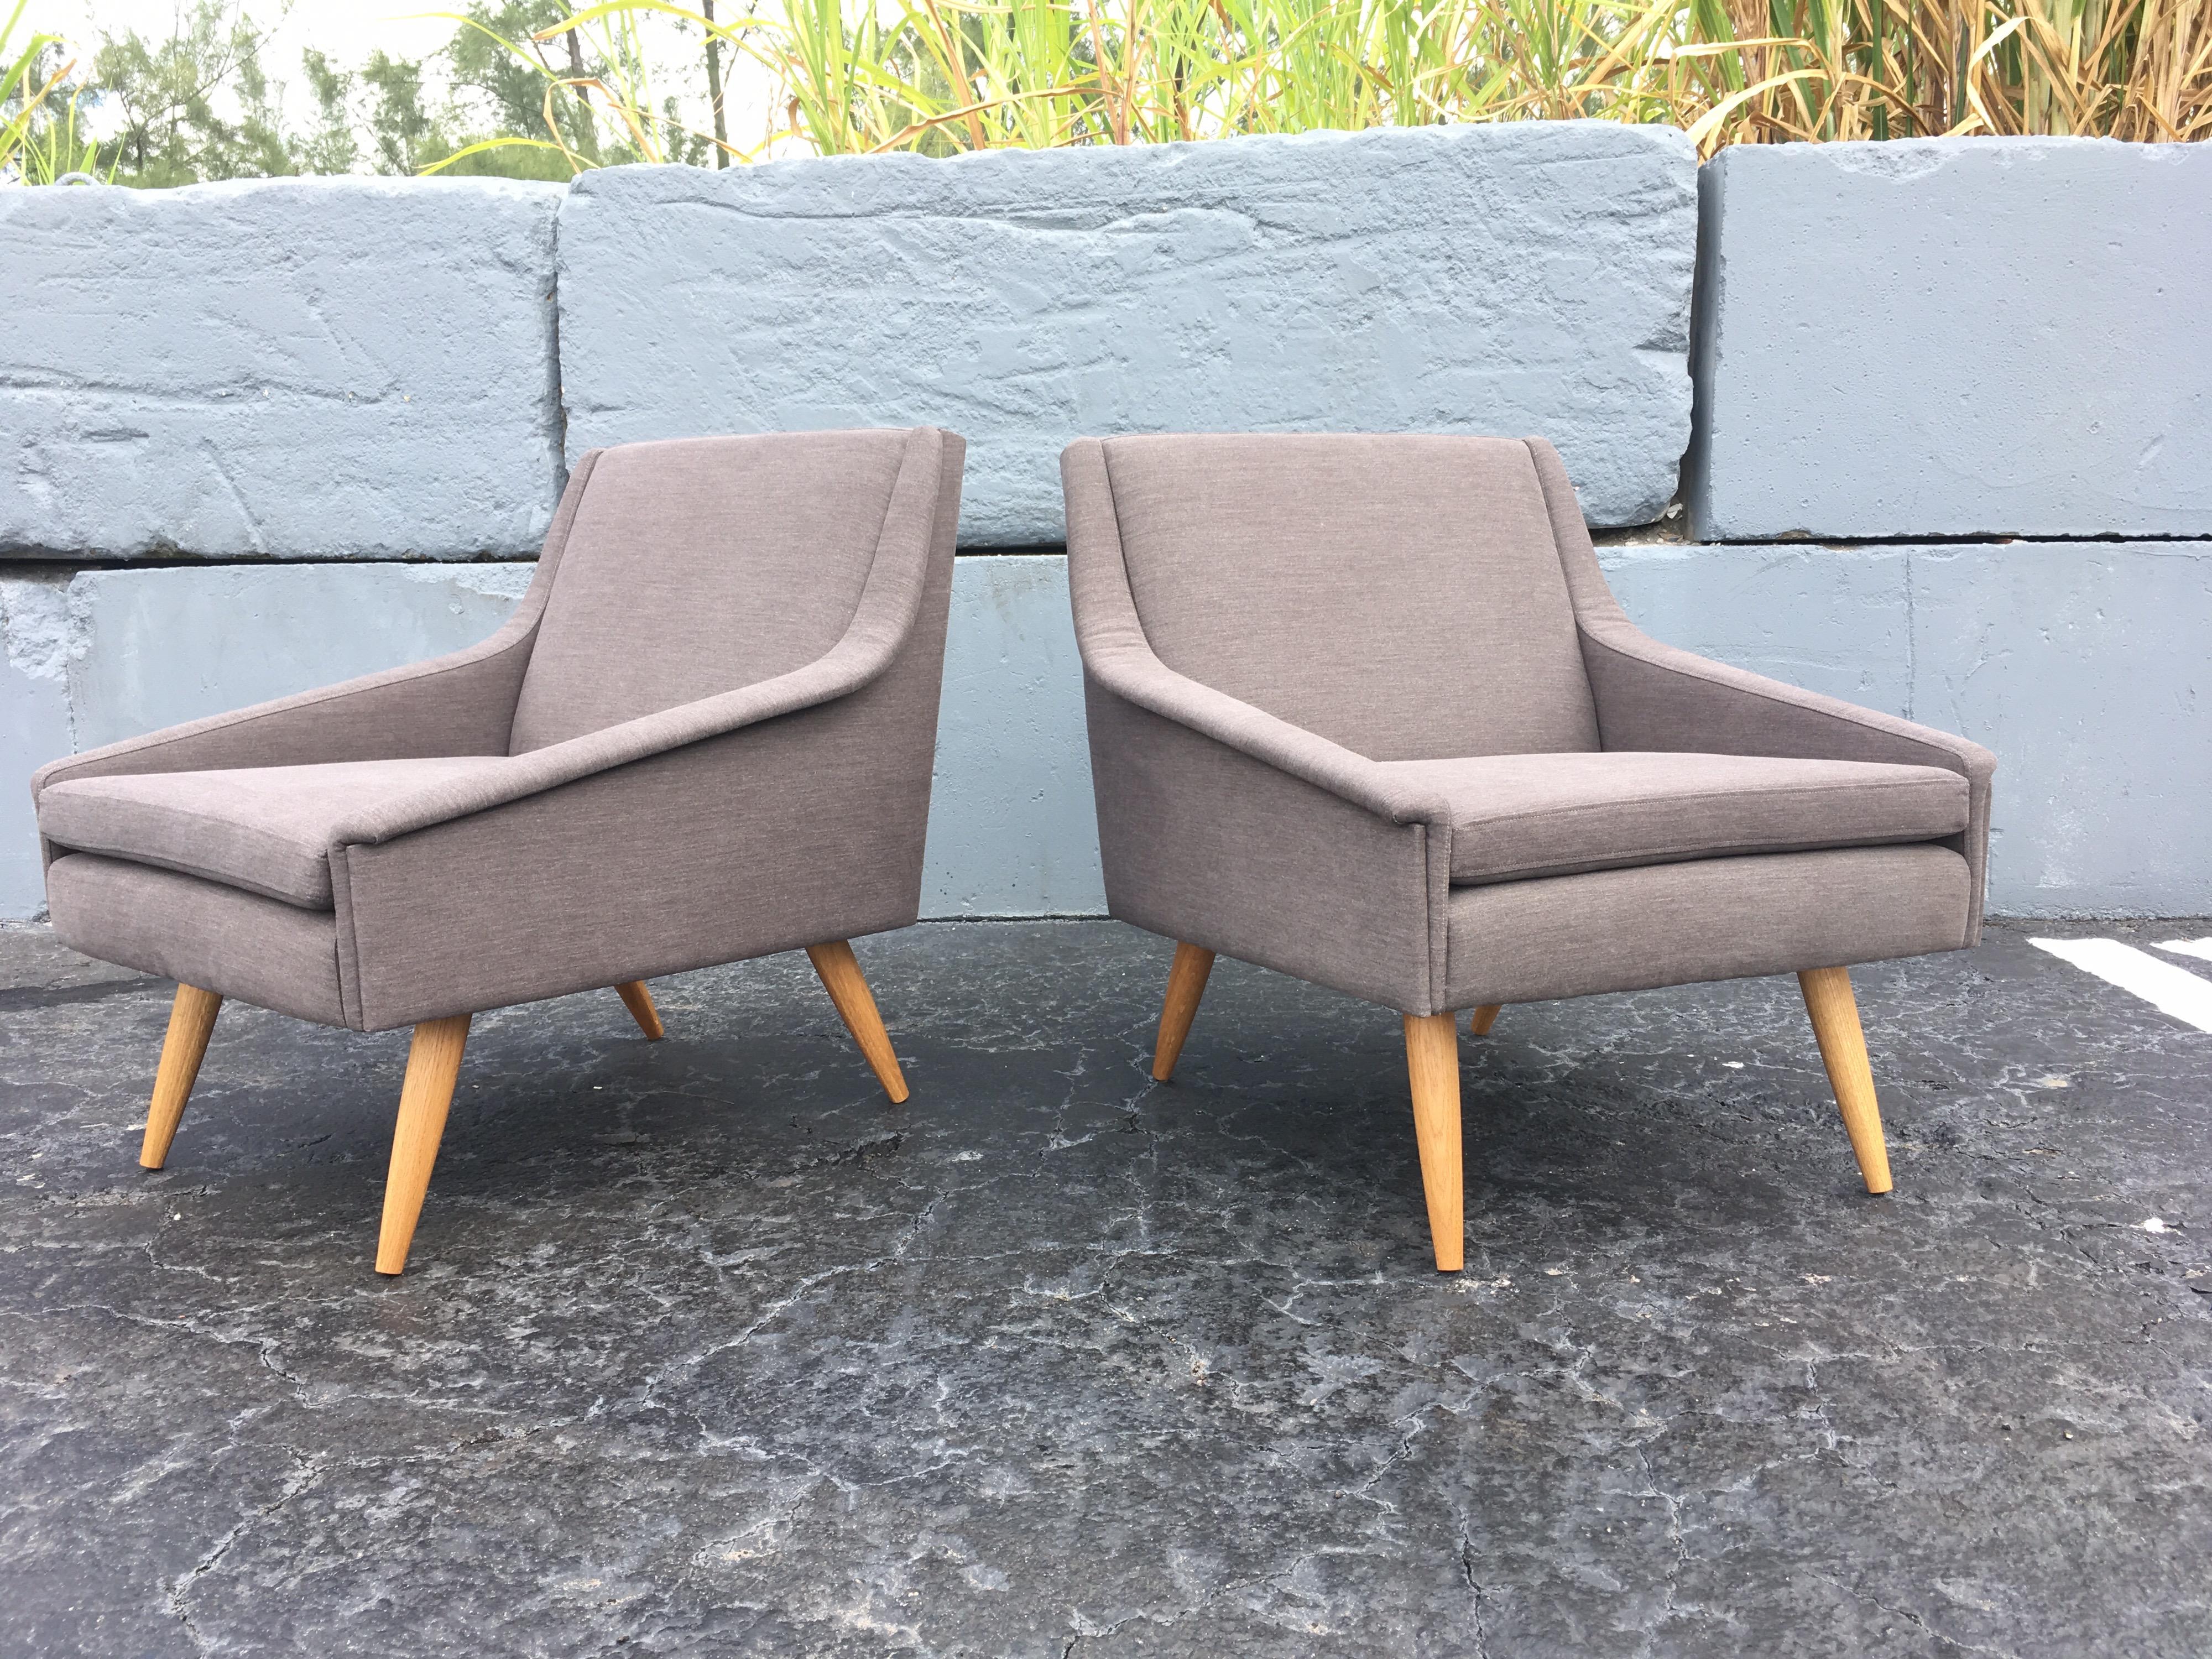 Great pair of Danish modern lounge chairs, gray fabric and oak legs. Ready for a new home.